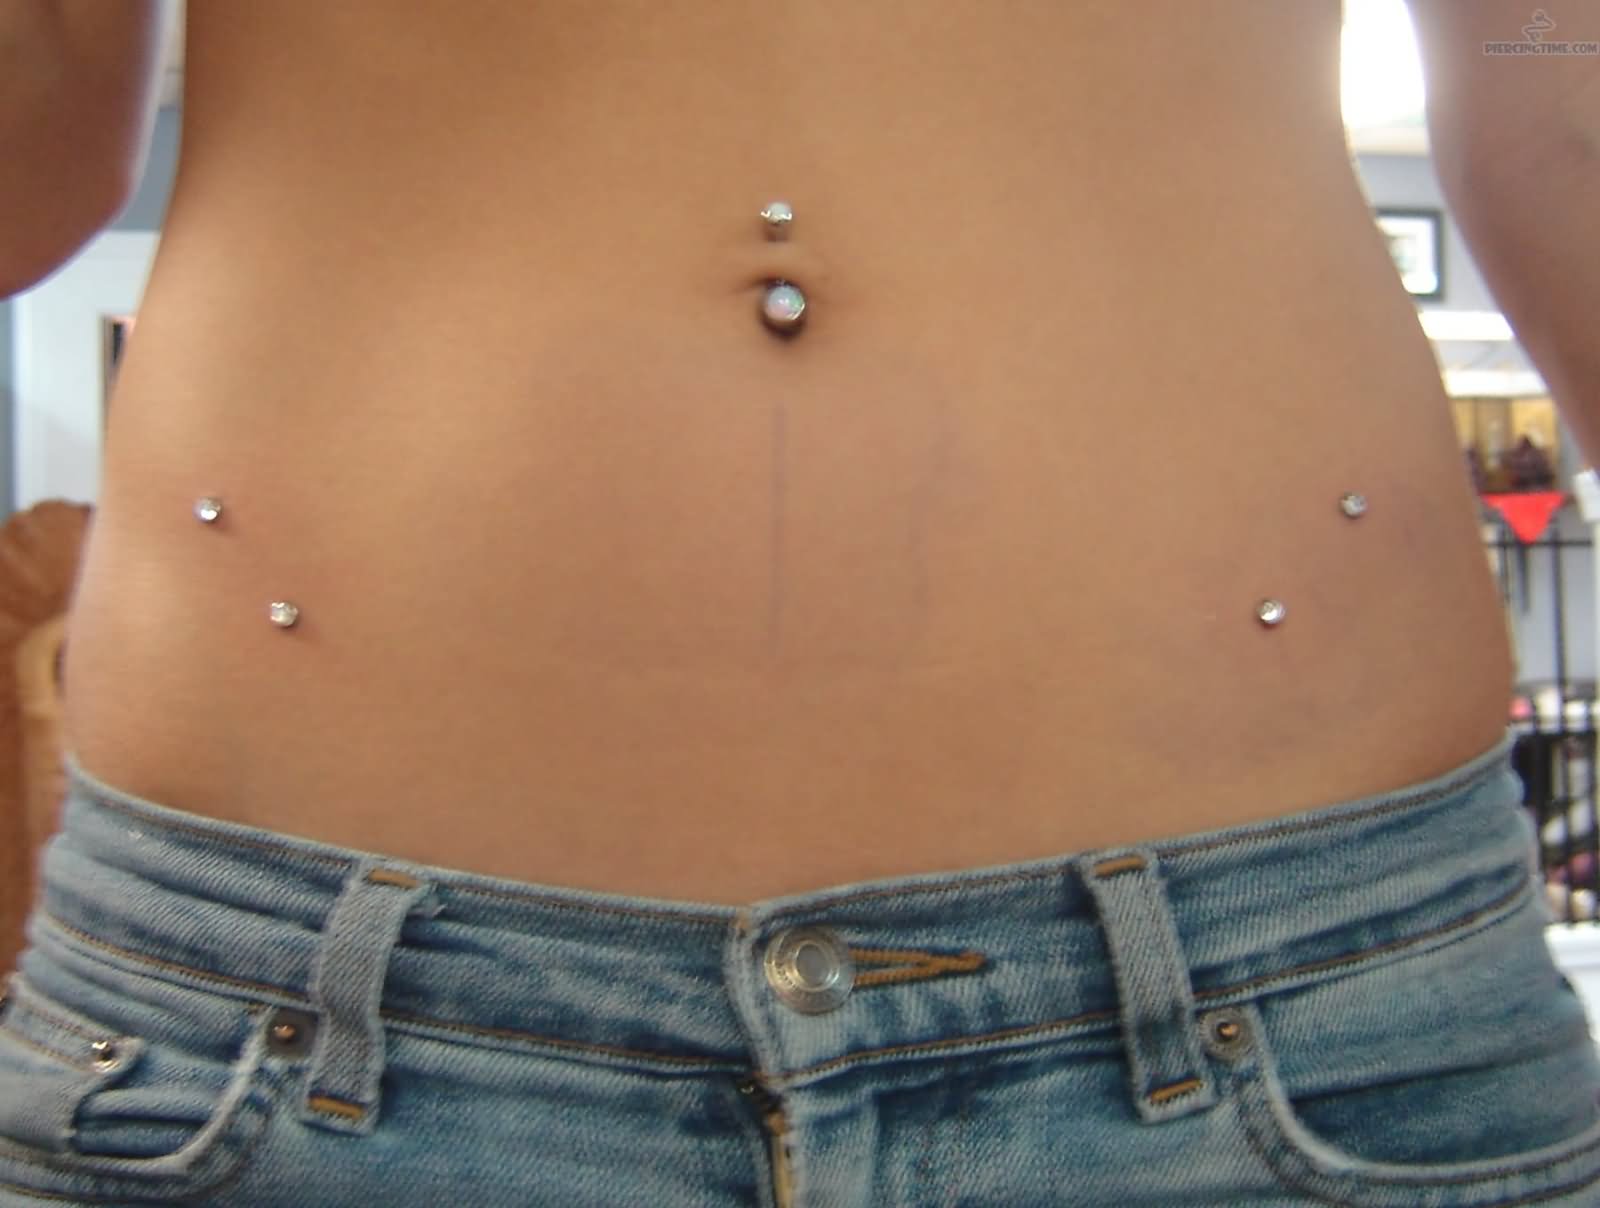 Surface Hip Piercing And Belly Piercing Image